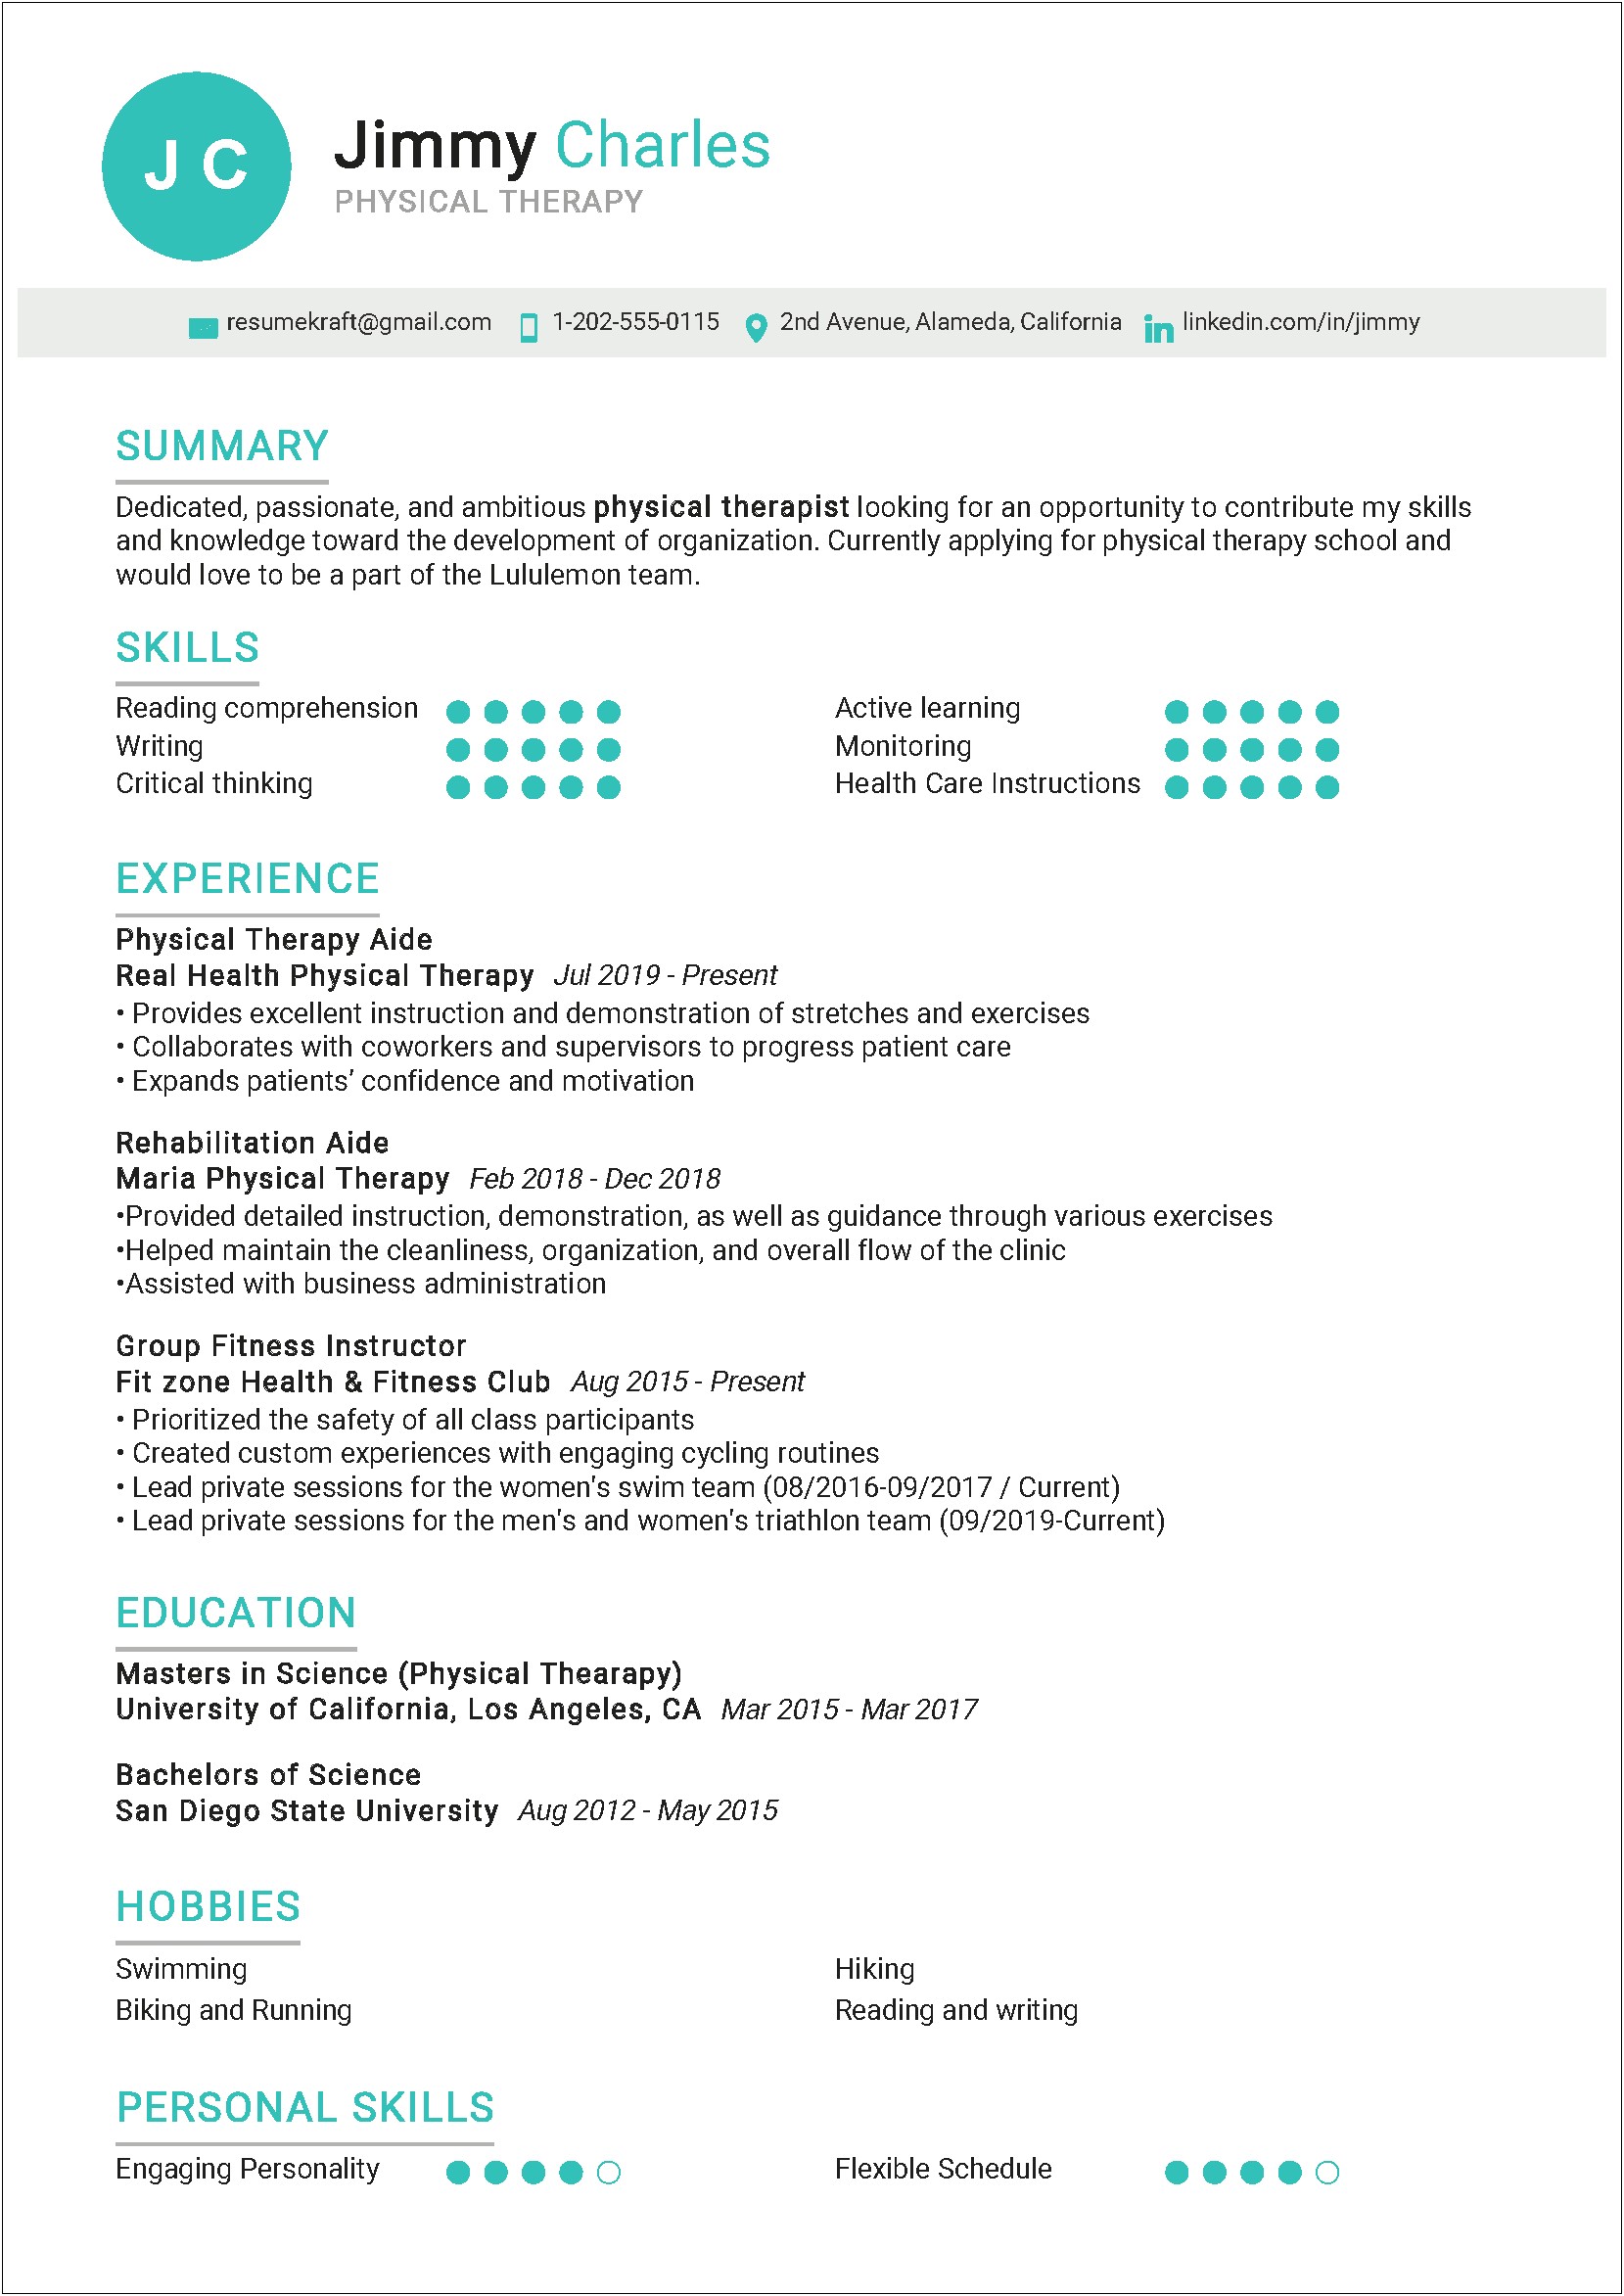 Creating A Cover Letter For Physical Therapy Resume